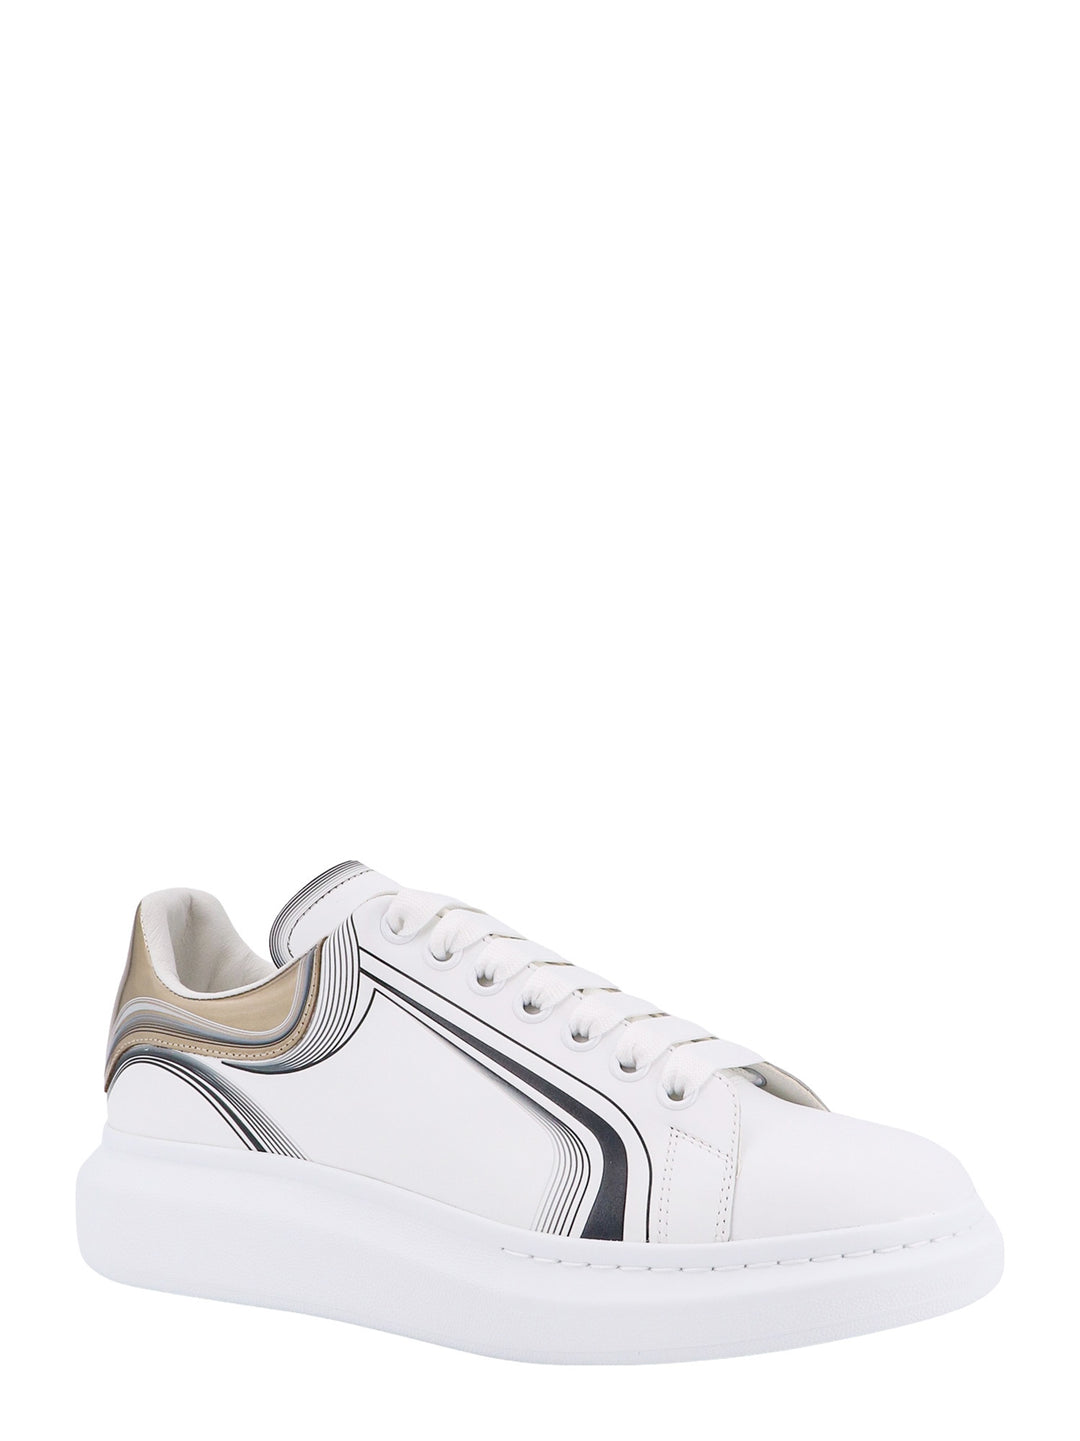 Sneakers in pelle con stampa Curve Tech